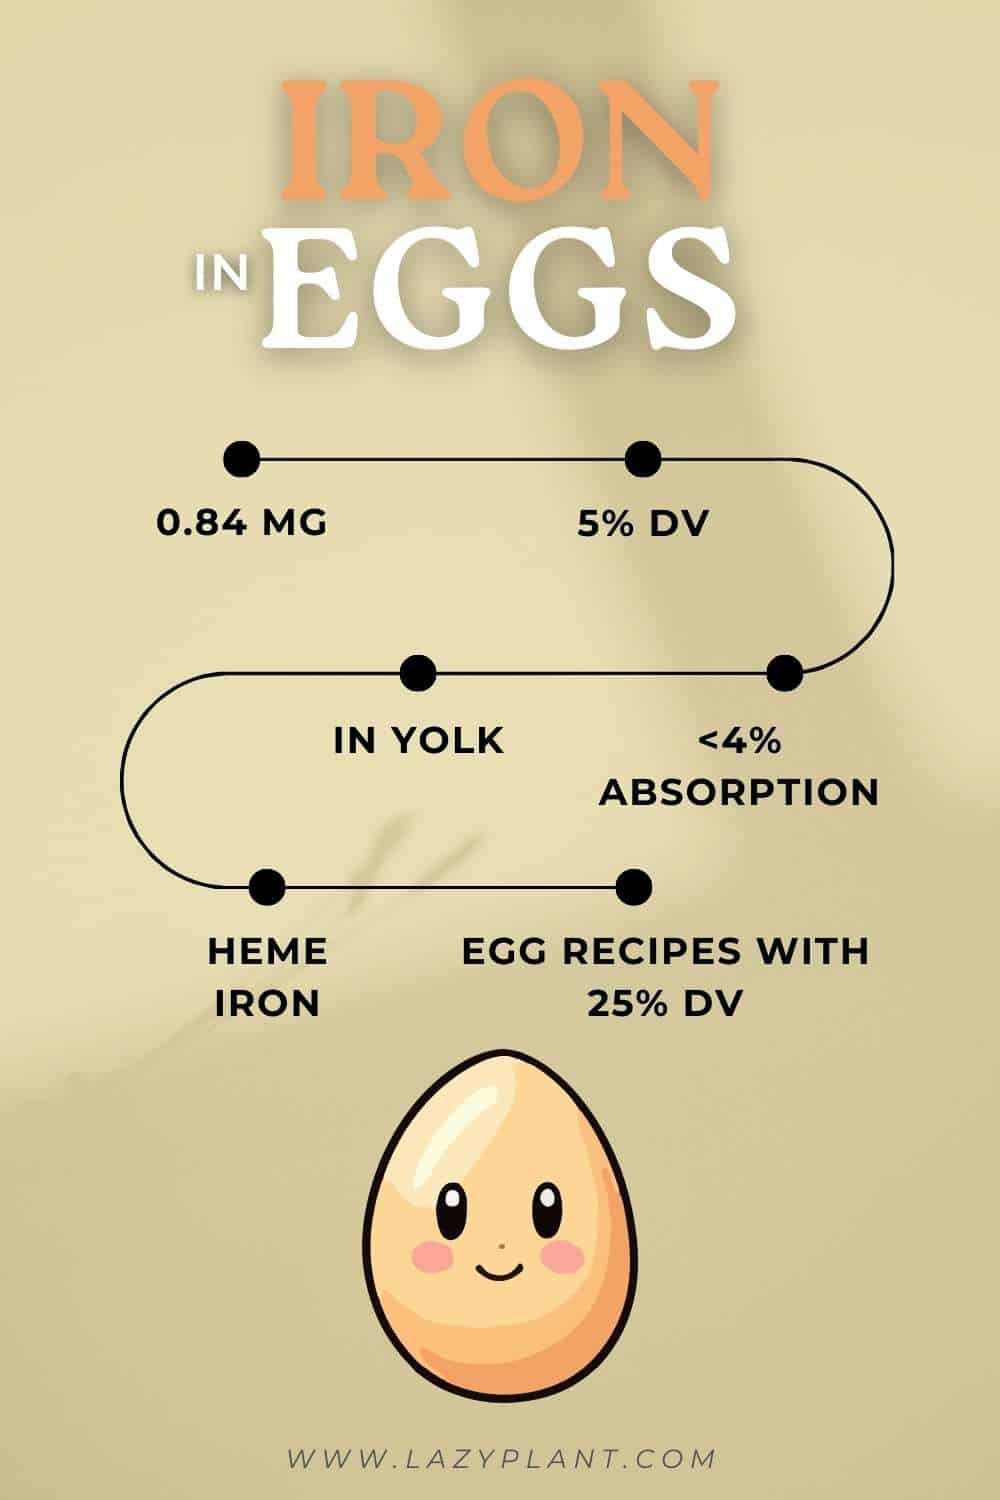 Benefits of eating Eggs for Iron